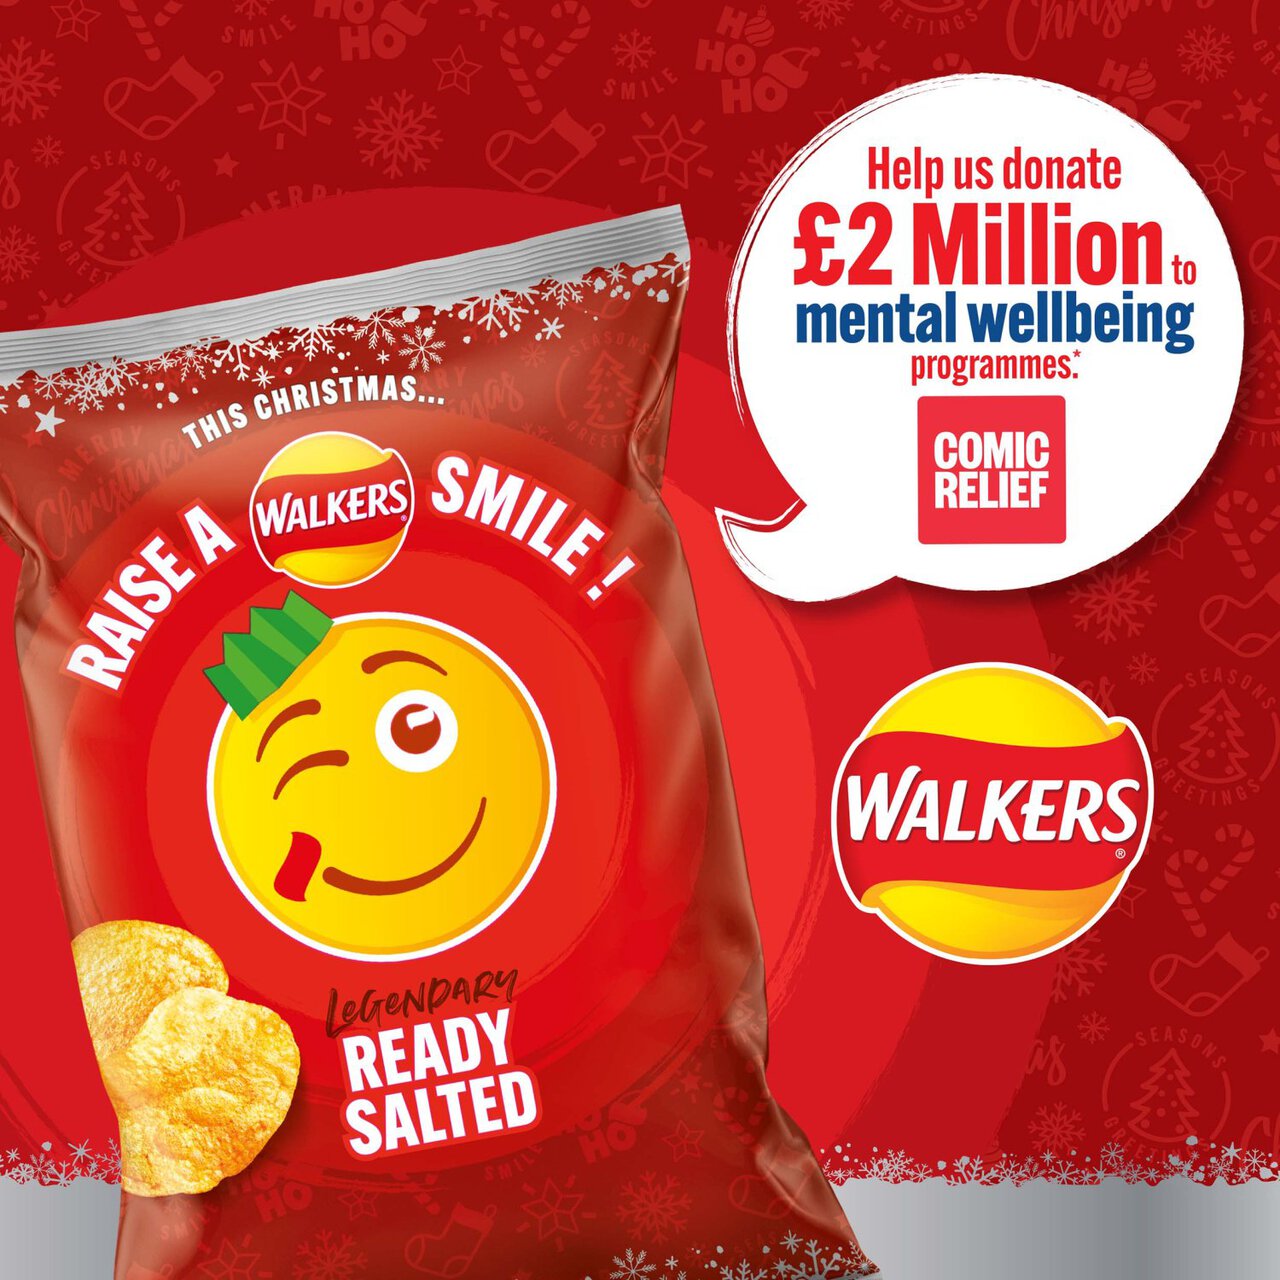 Walkers Ready Salted Crisps 175g